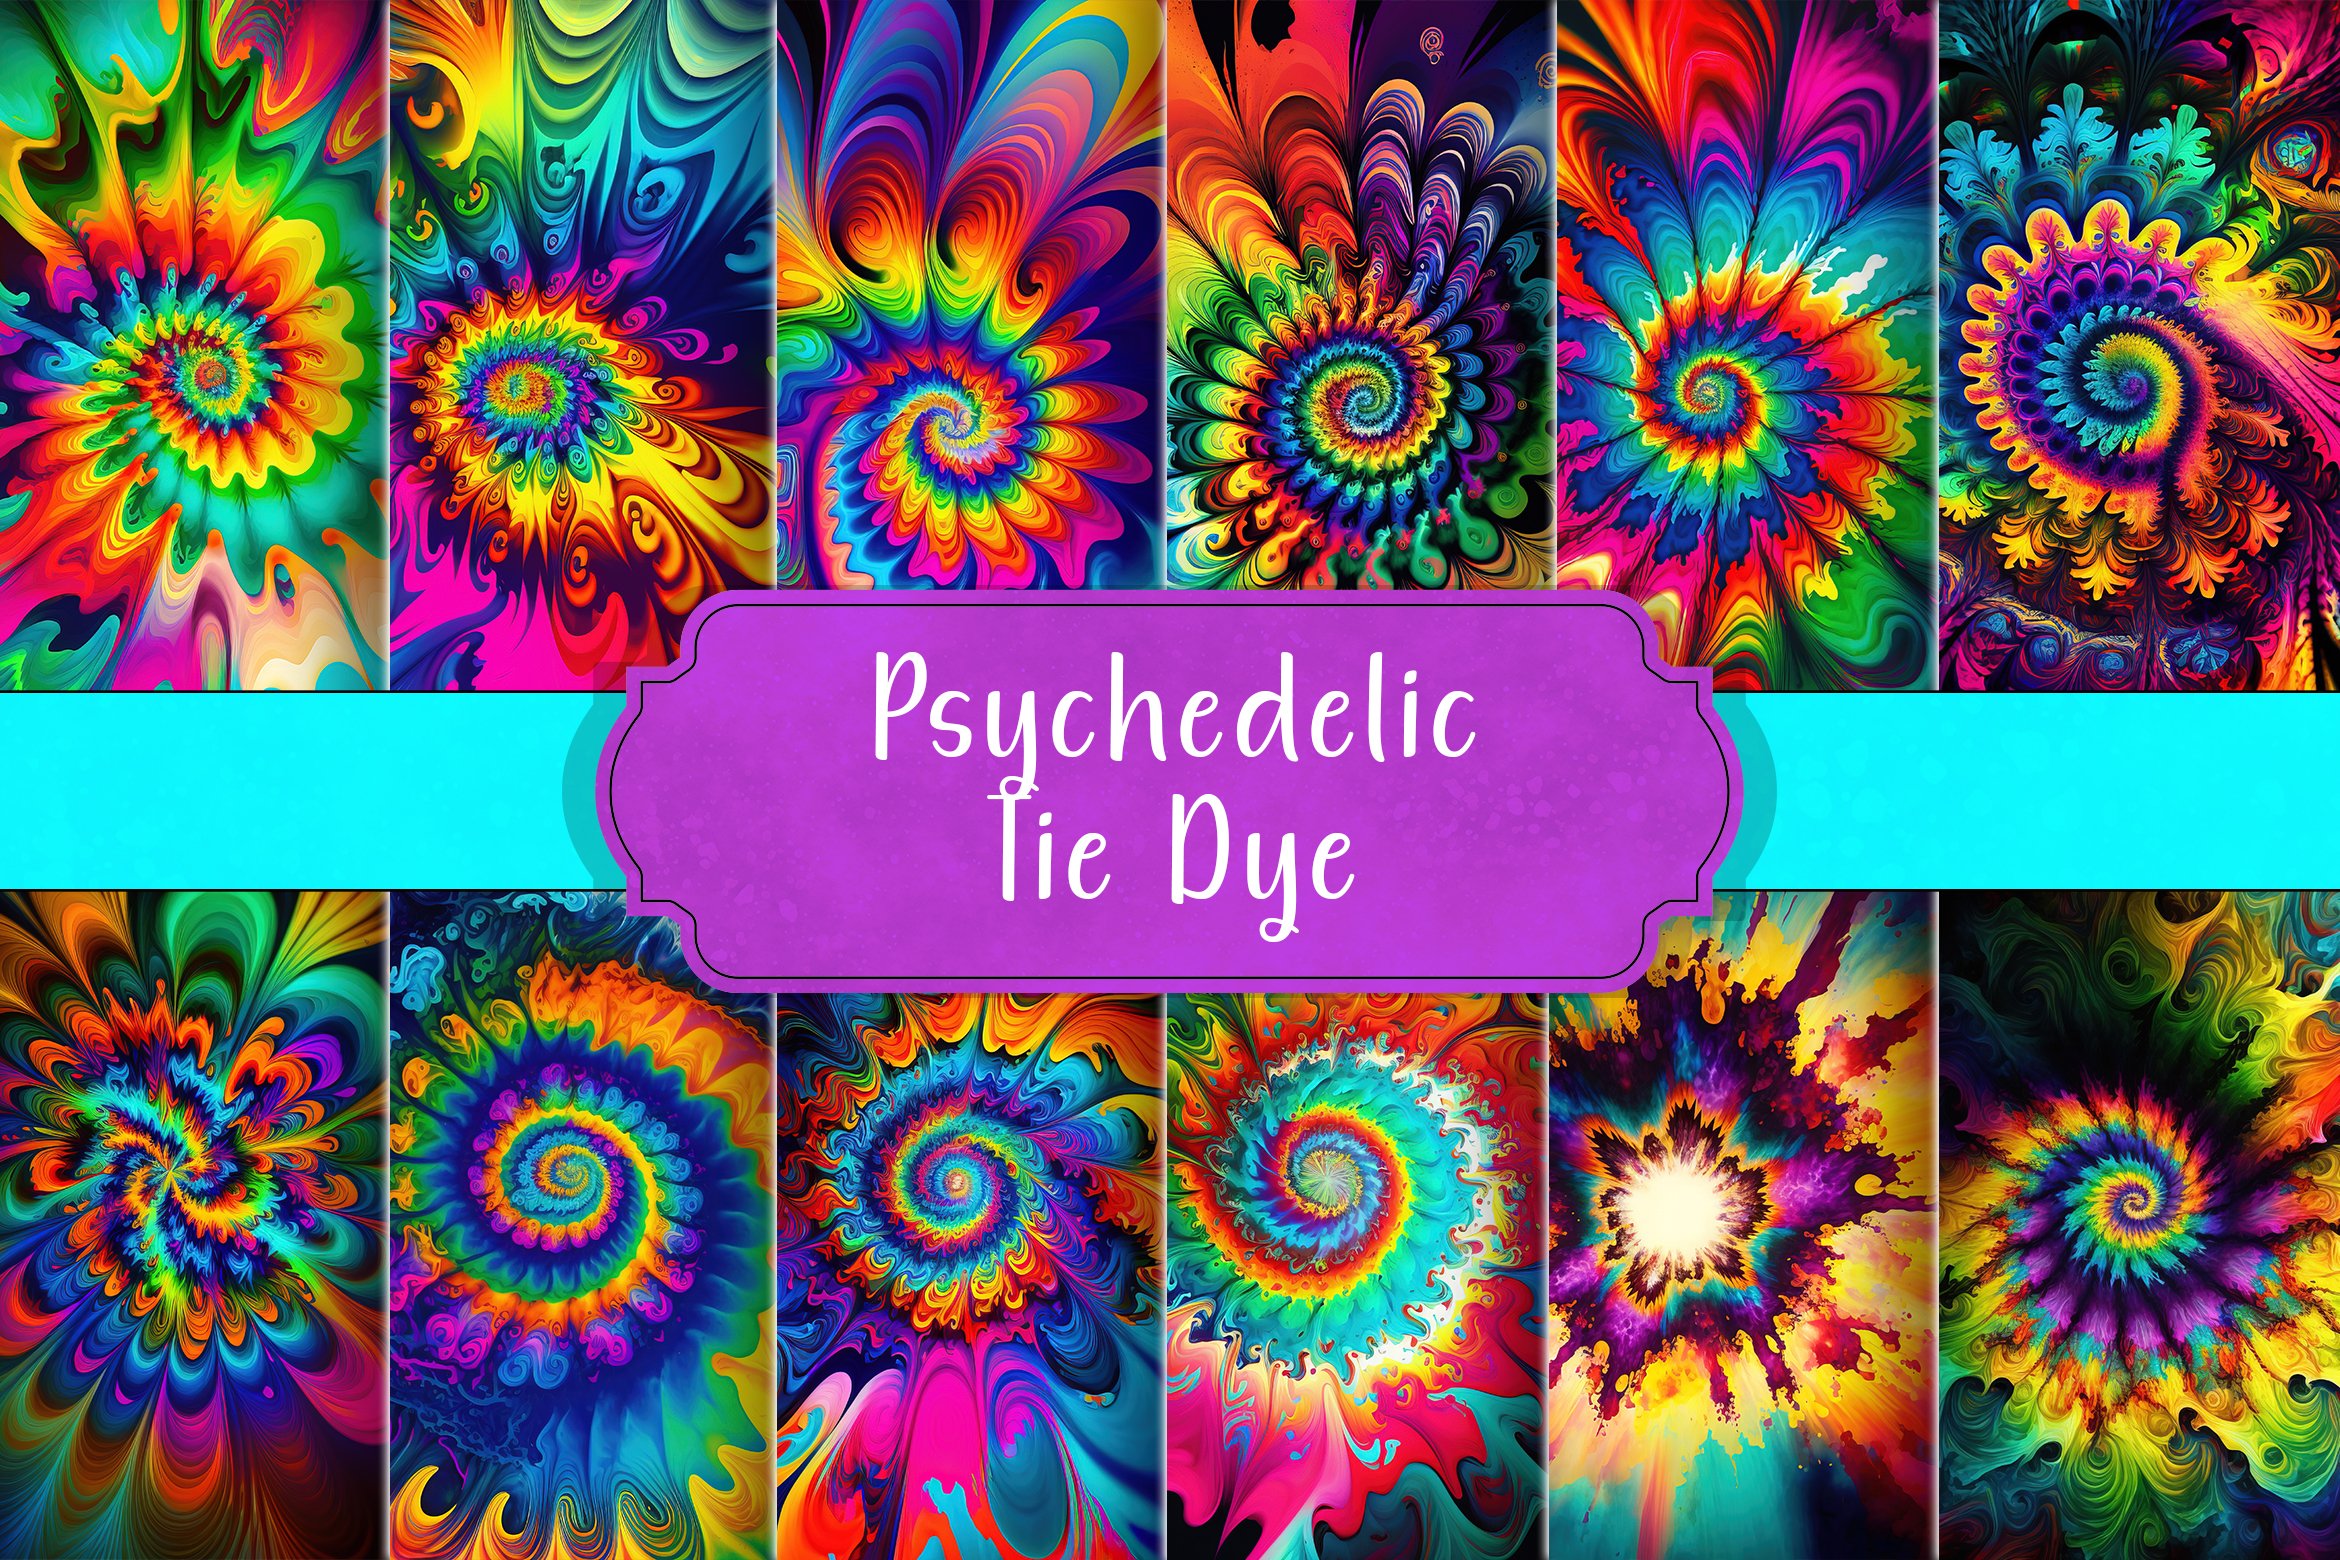 Psychedelic Tie Dye cover image.